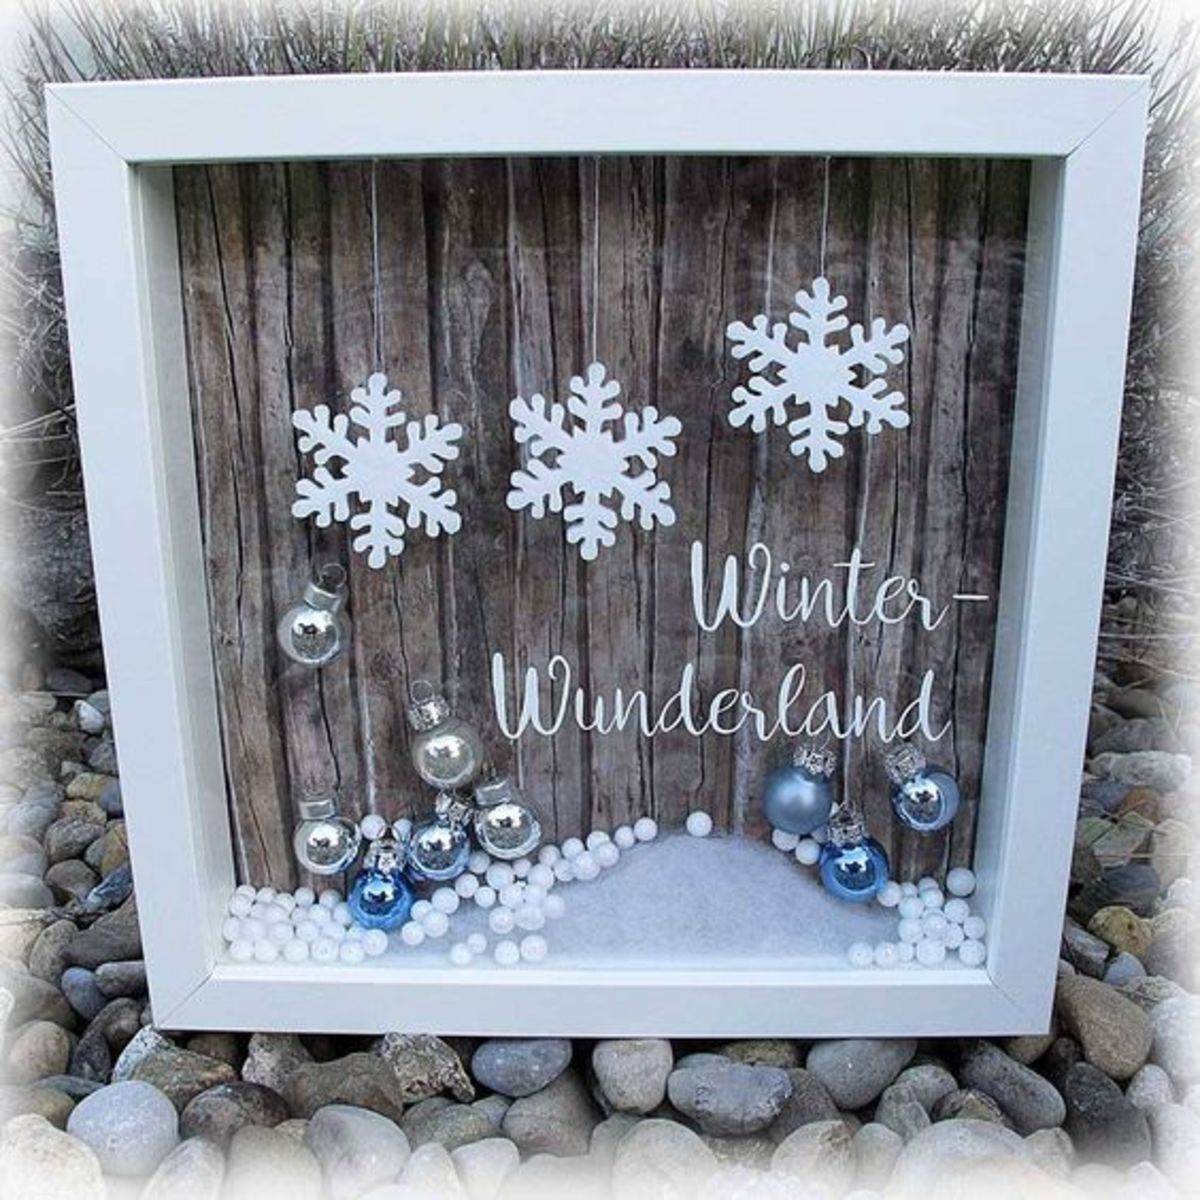 This shadow box uses rustic wood and white snowflakes.